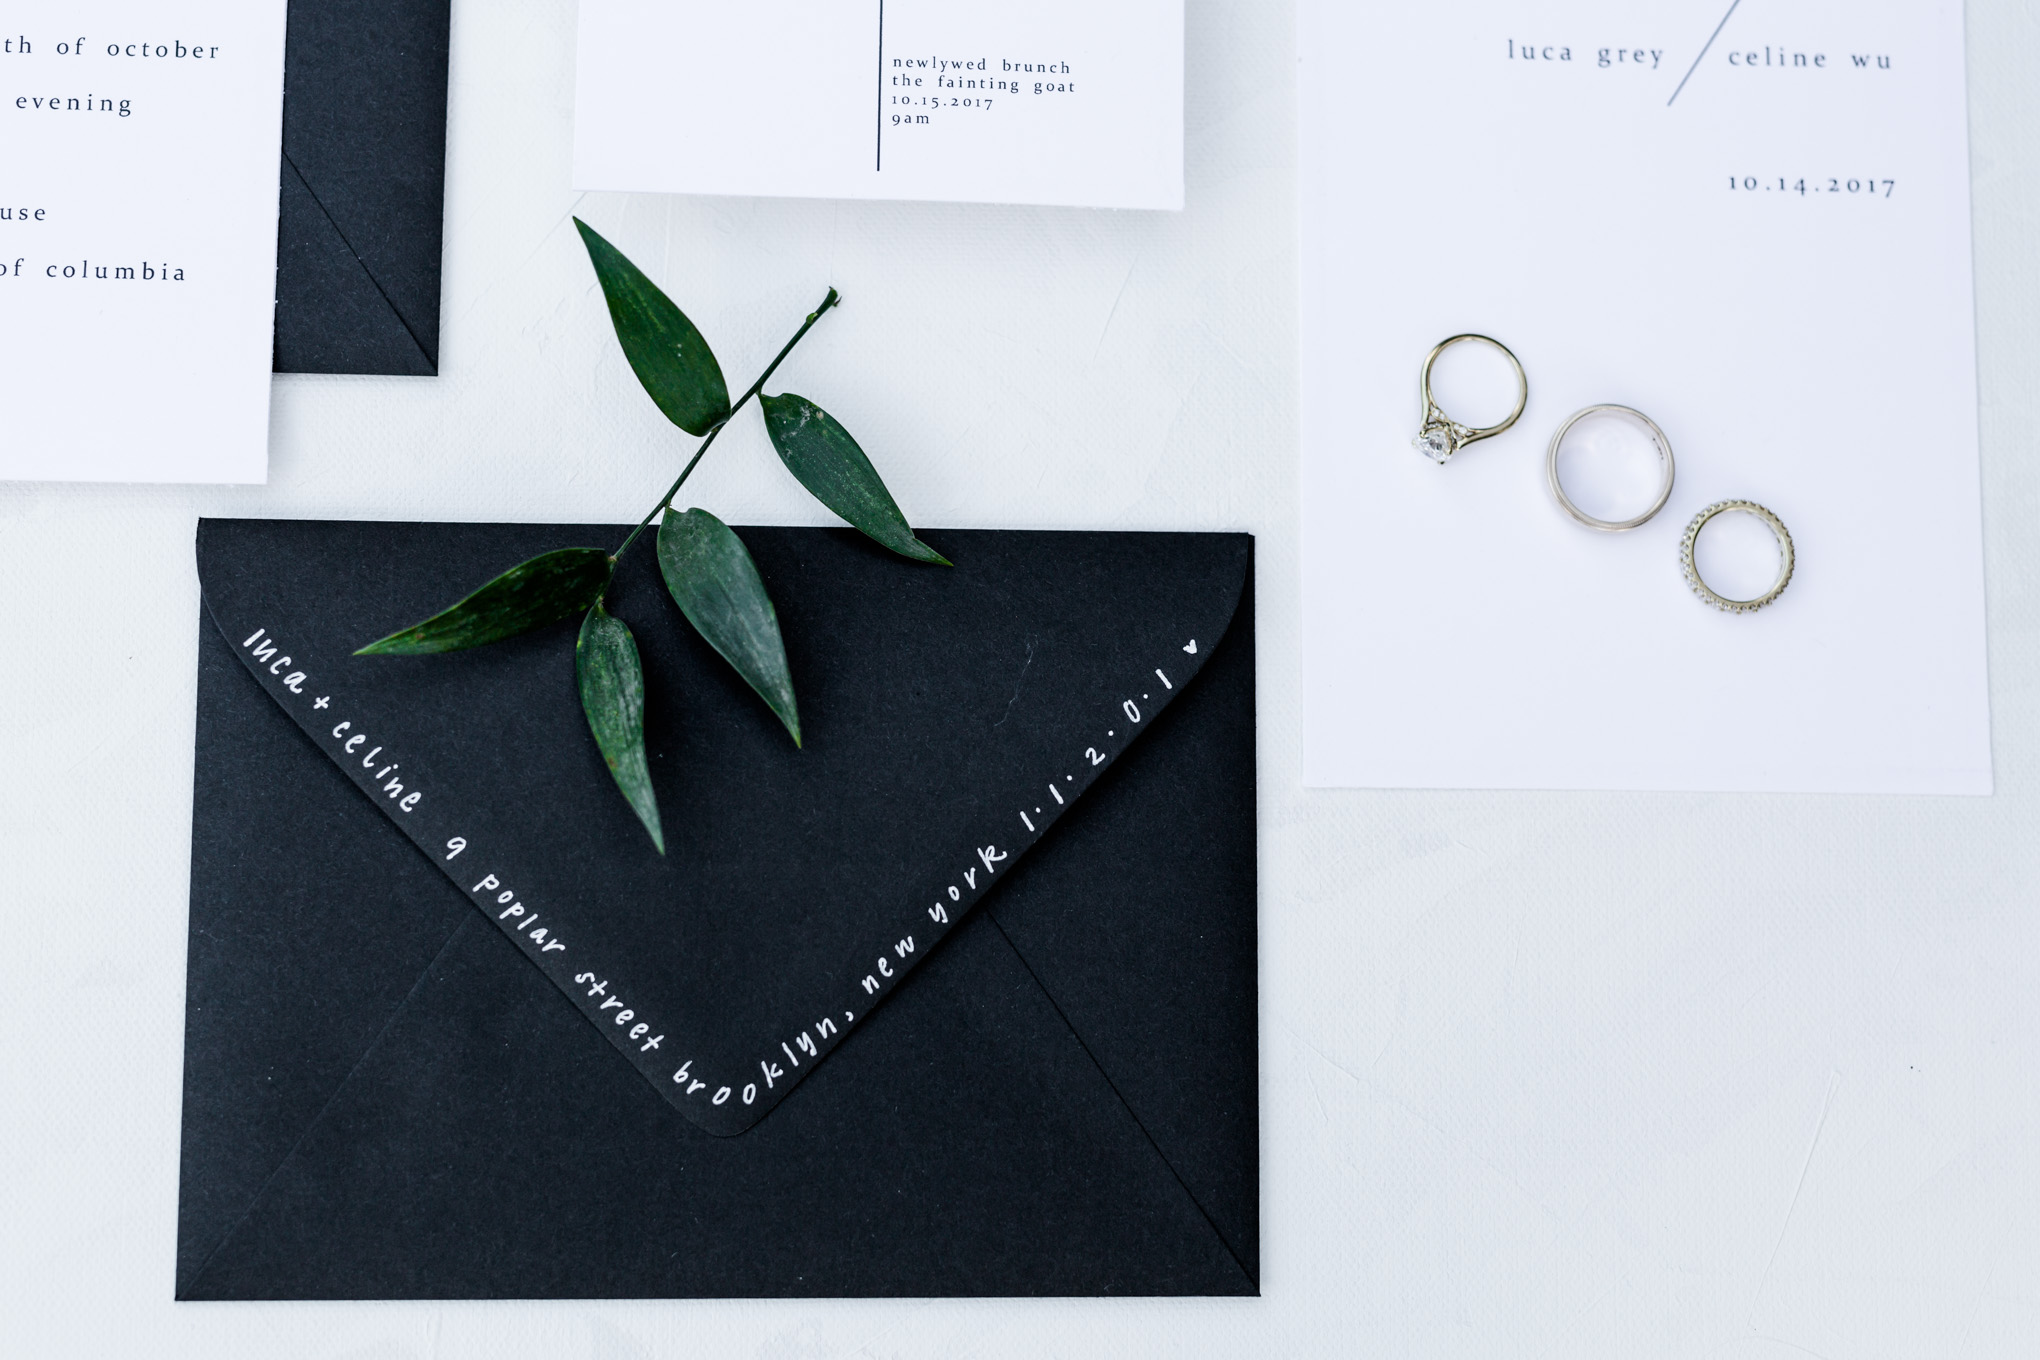 tangible takeaways, Arlington, northern Virginia, natural light wedding photography, outdoor wedding, elegant wedding, elegant wedding details, black envelopes, white writing, calligraphy, wedding invitations, elegant wedding invitations, Alchemy Calligraphy and Design, Elizabeth Carberry